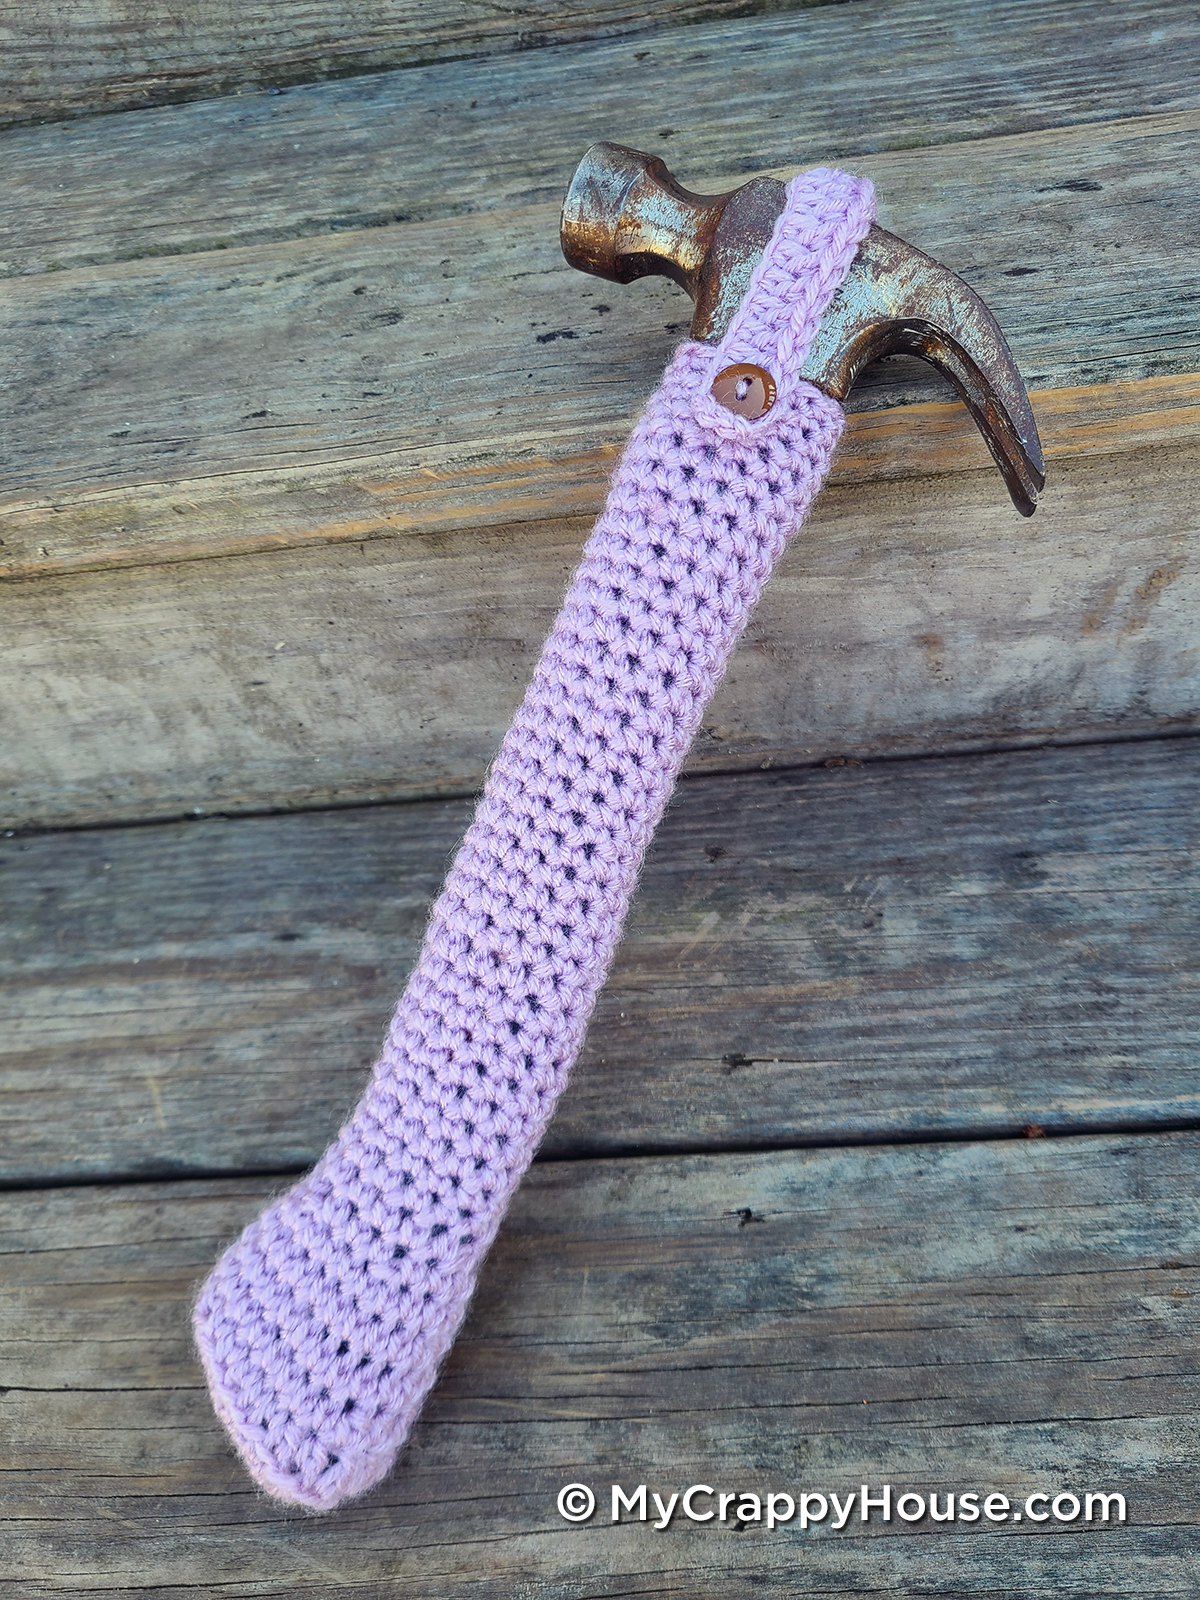 Hammer with crocheted cozy